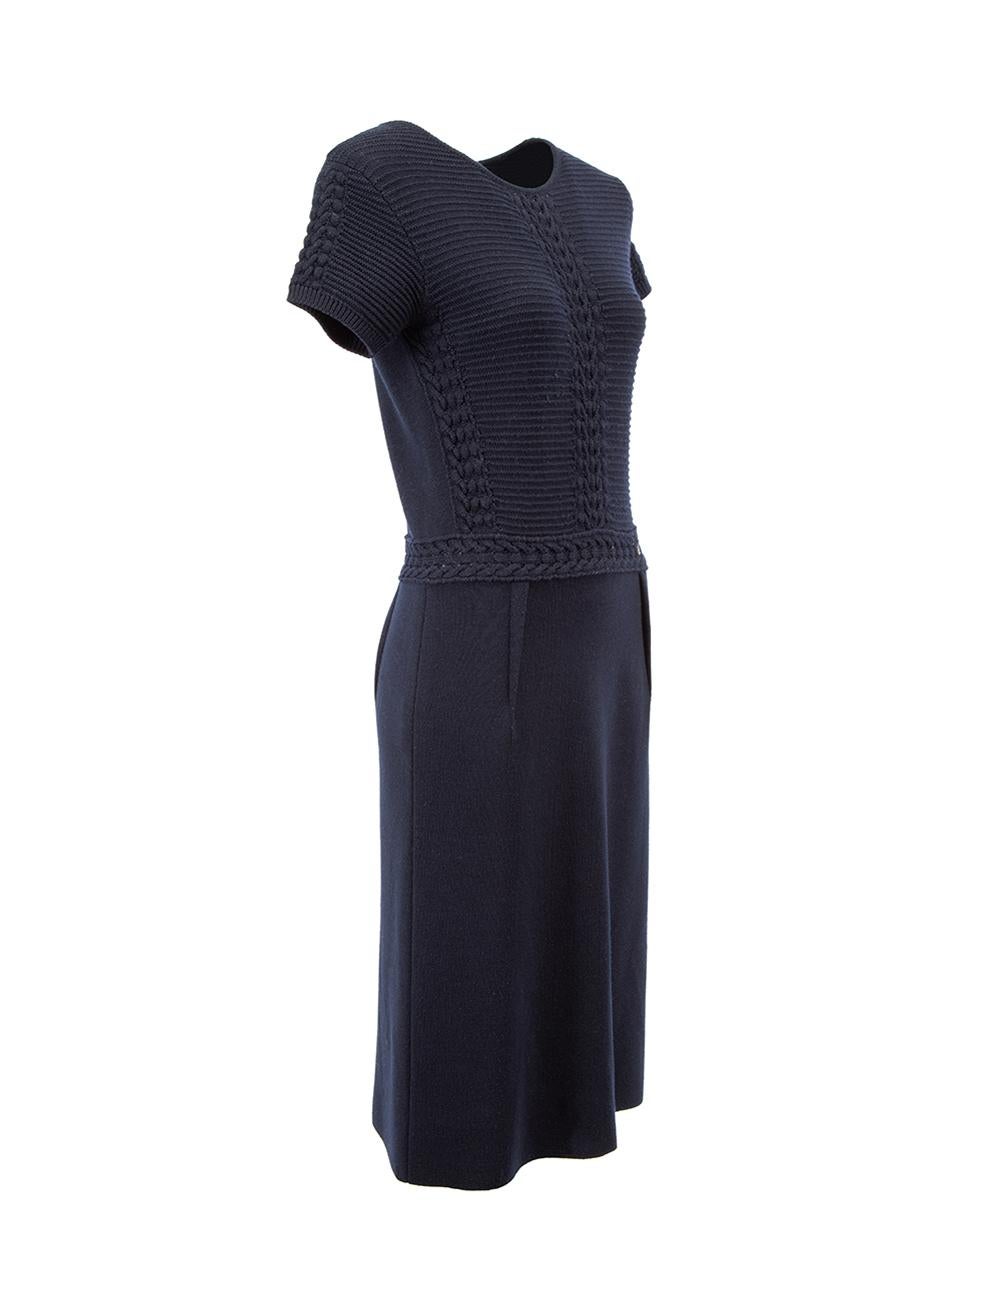 CONDITION is Good. Minor wear to dress is evident. Light wear to the left side with a small hole and neckline lining on this used CH Carolina Herrera designer resale item.



Details


Navy

Wool

Knitted dress

Round neck

Short sleeves

Cable knit